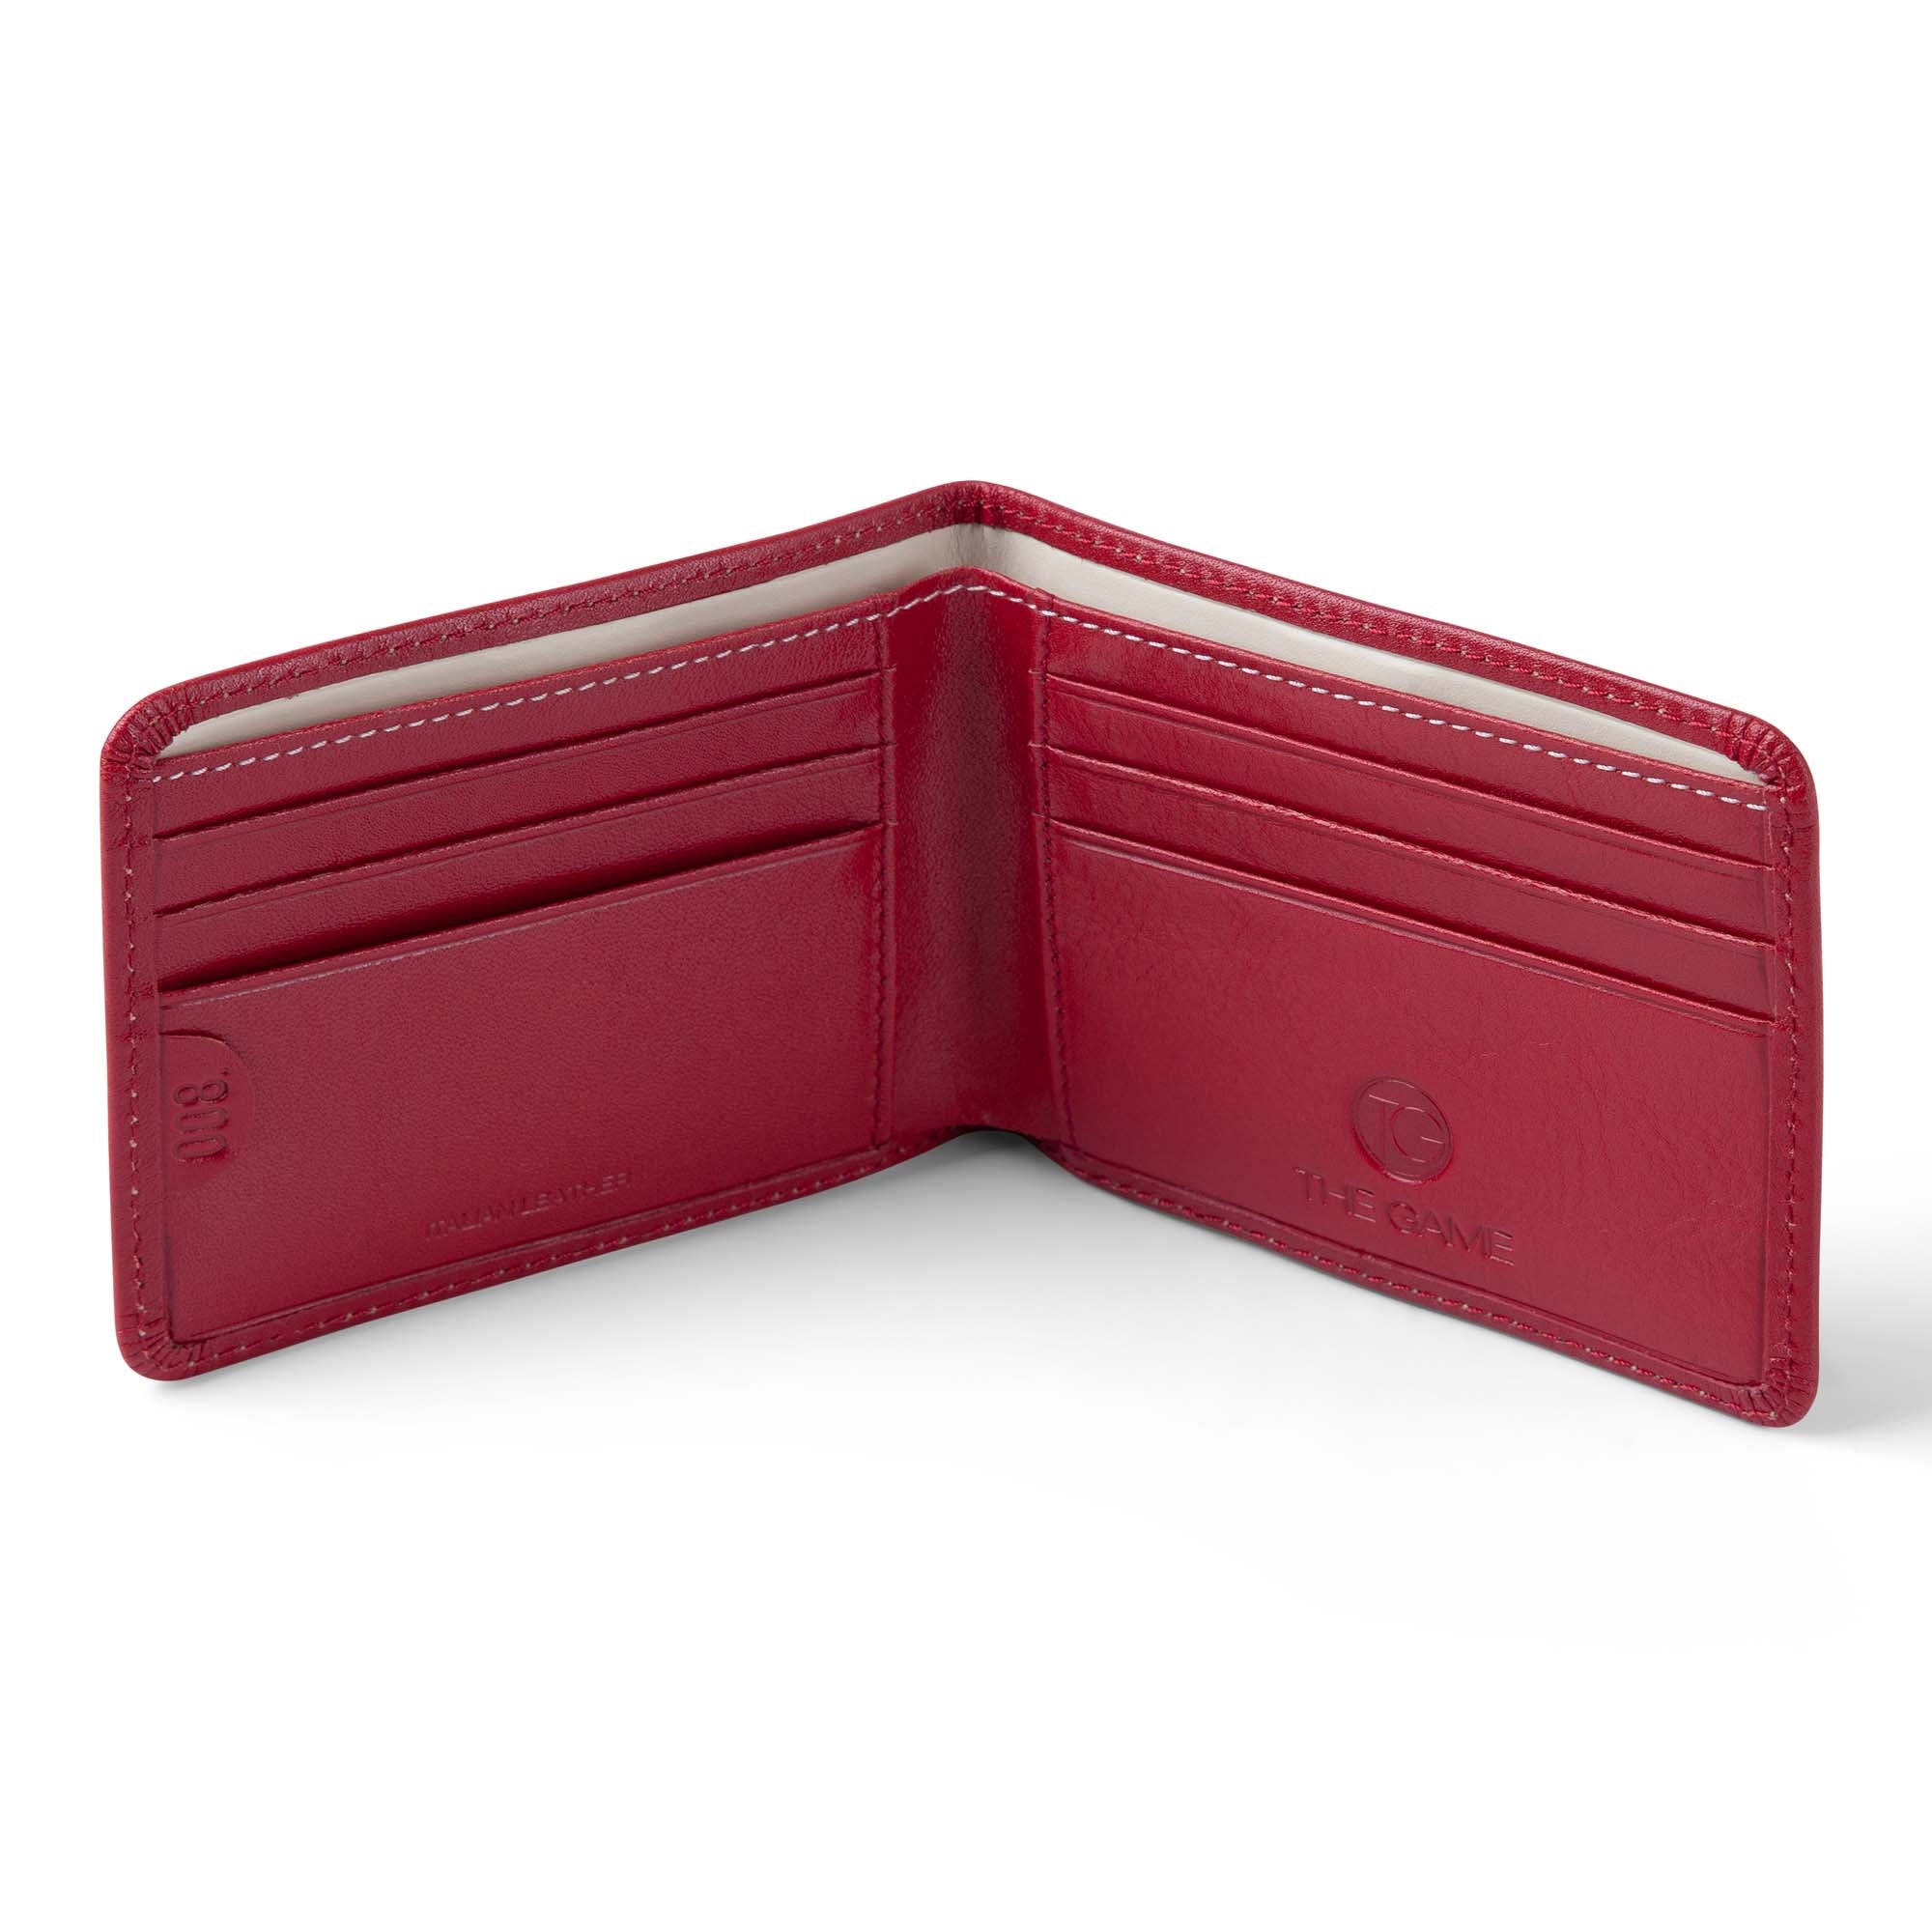 The International - Limited Edition Wallet - The Game